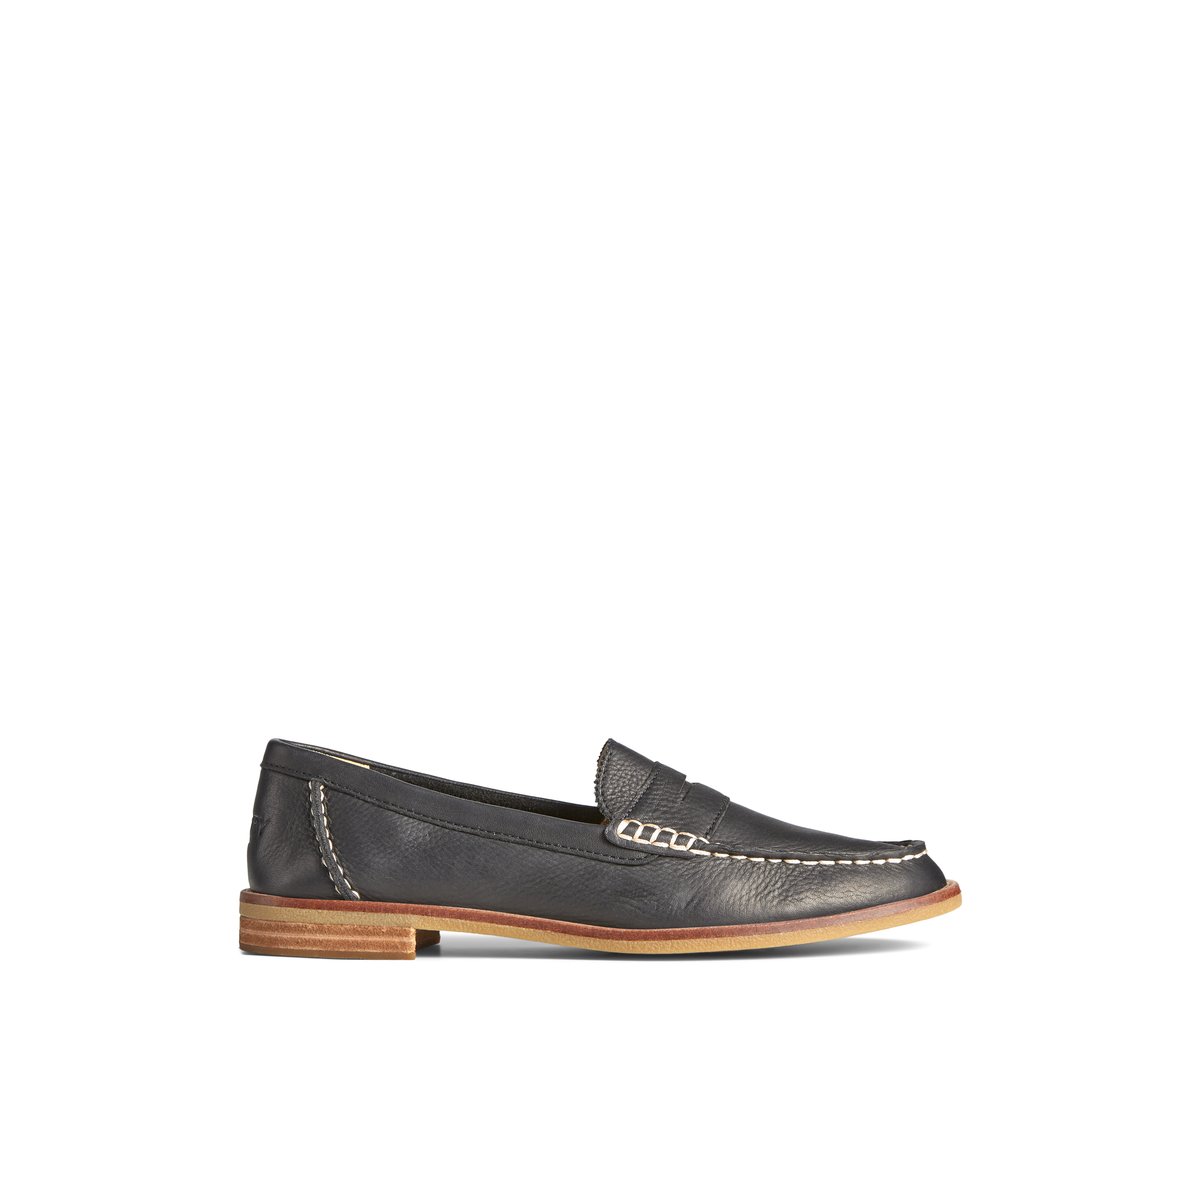 Seaport Penny Leather Loafer Black Women's Oxfords & Loafers